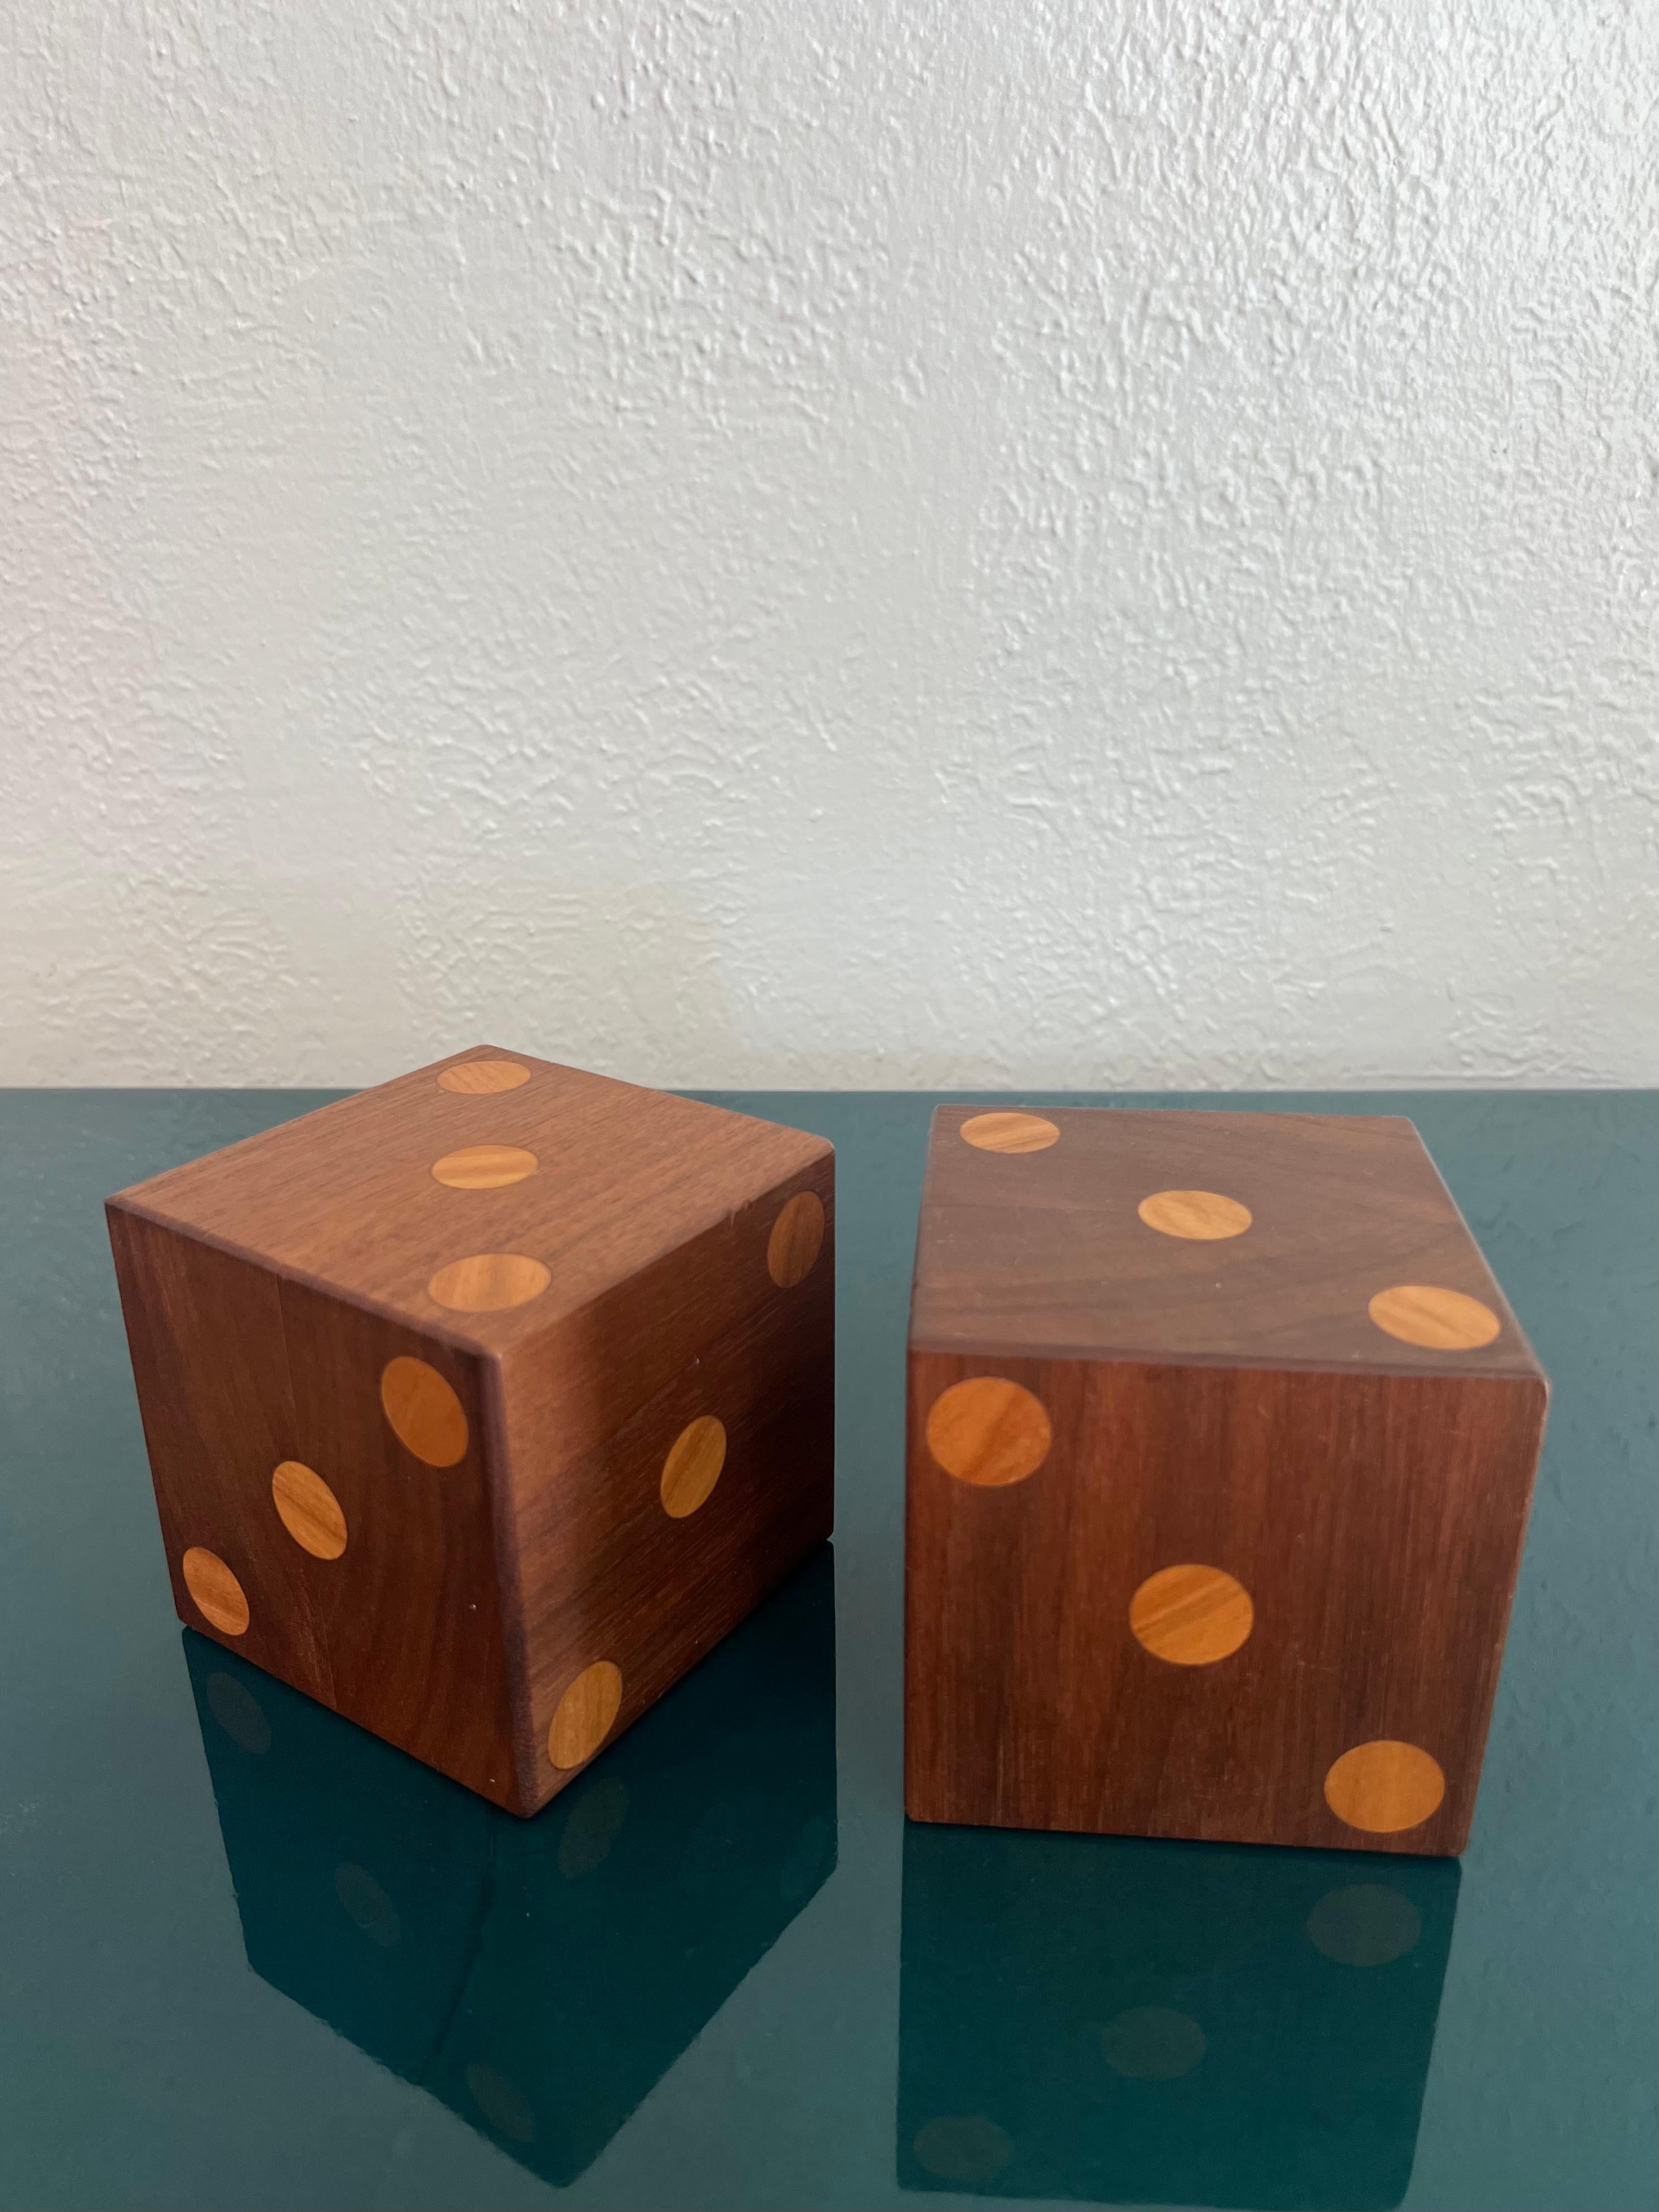 Large pair of wooden dice. All sides show a 3. Show some signs of wear (please refer to photos). 

Would work well in a variety of interiors such as modern, mid century modern, Hollywood regency, etc. Piece blends seamlessly with other designers